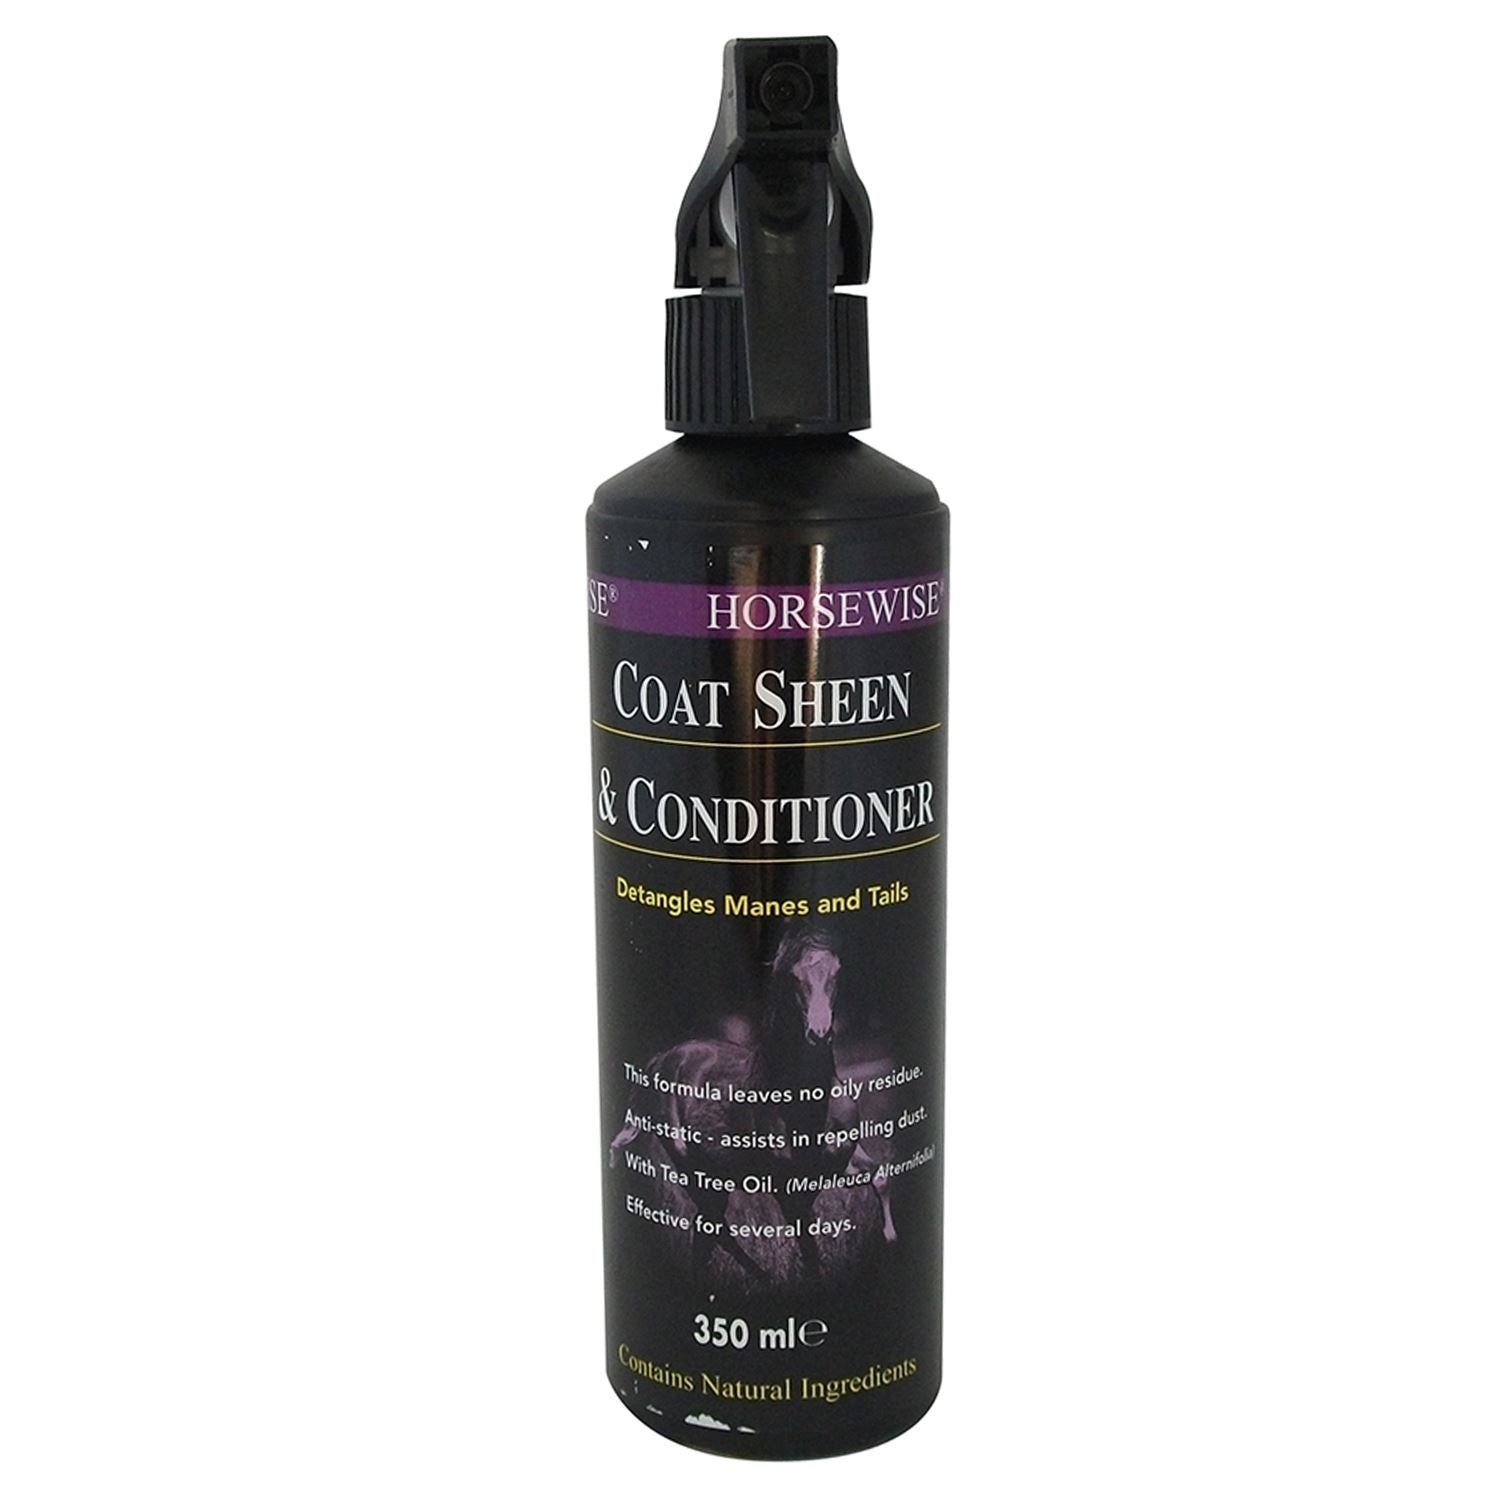 Horsewise Coat Sheen & Conditioner - Just Horse Riders